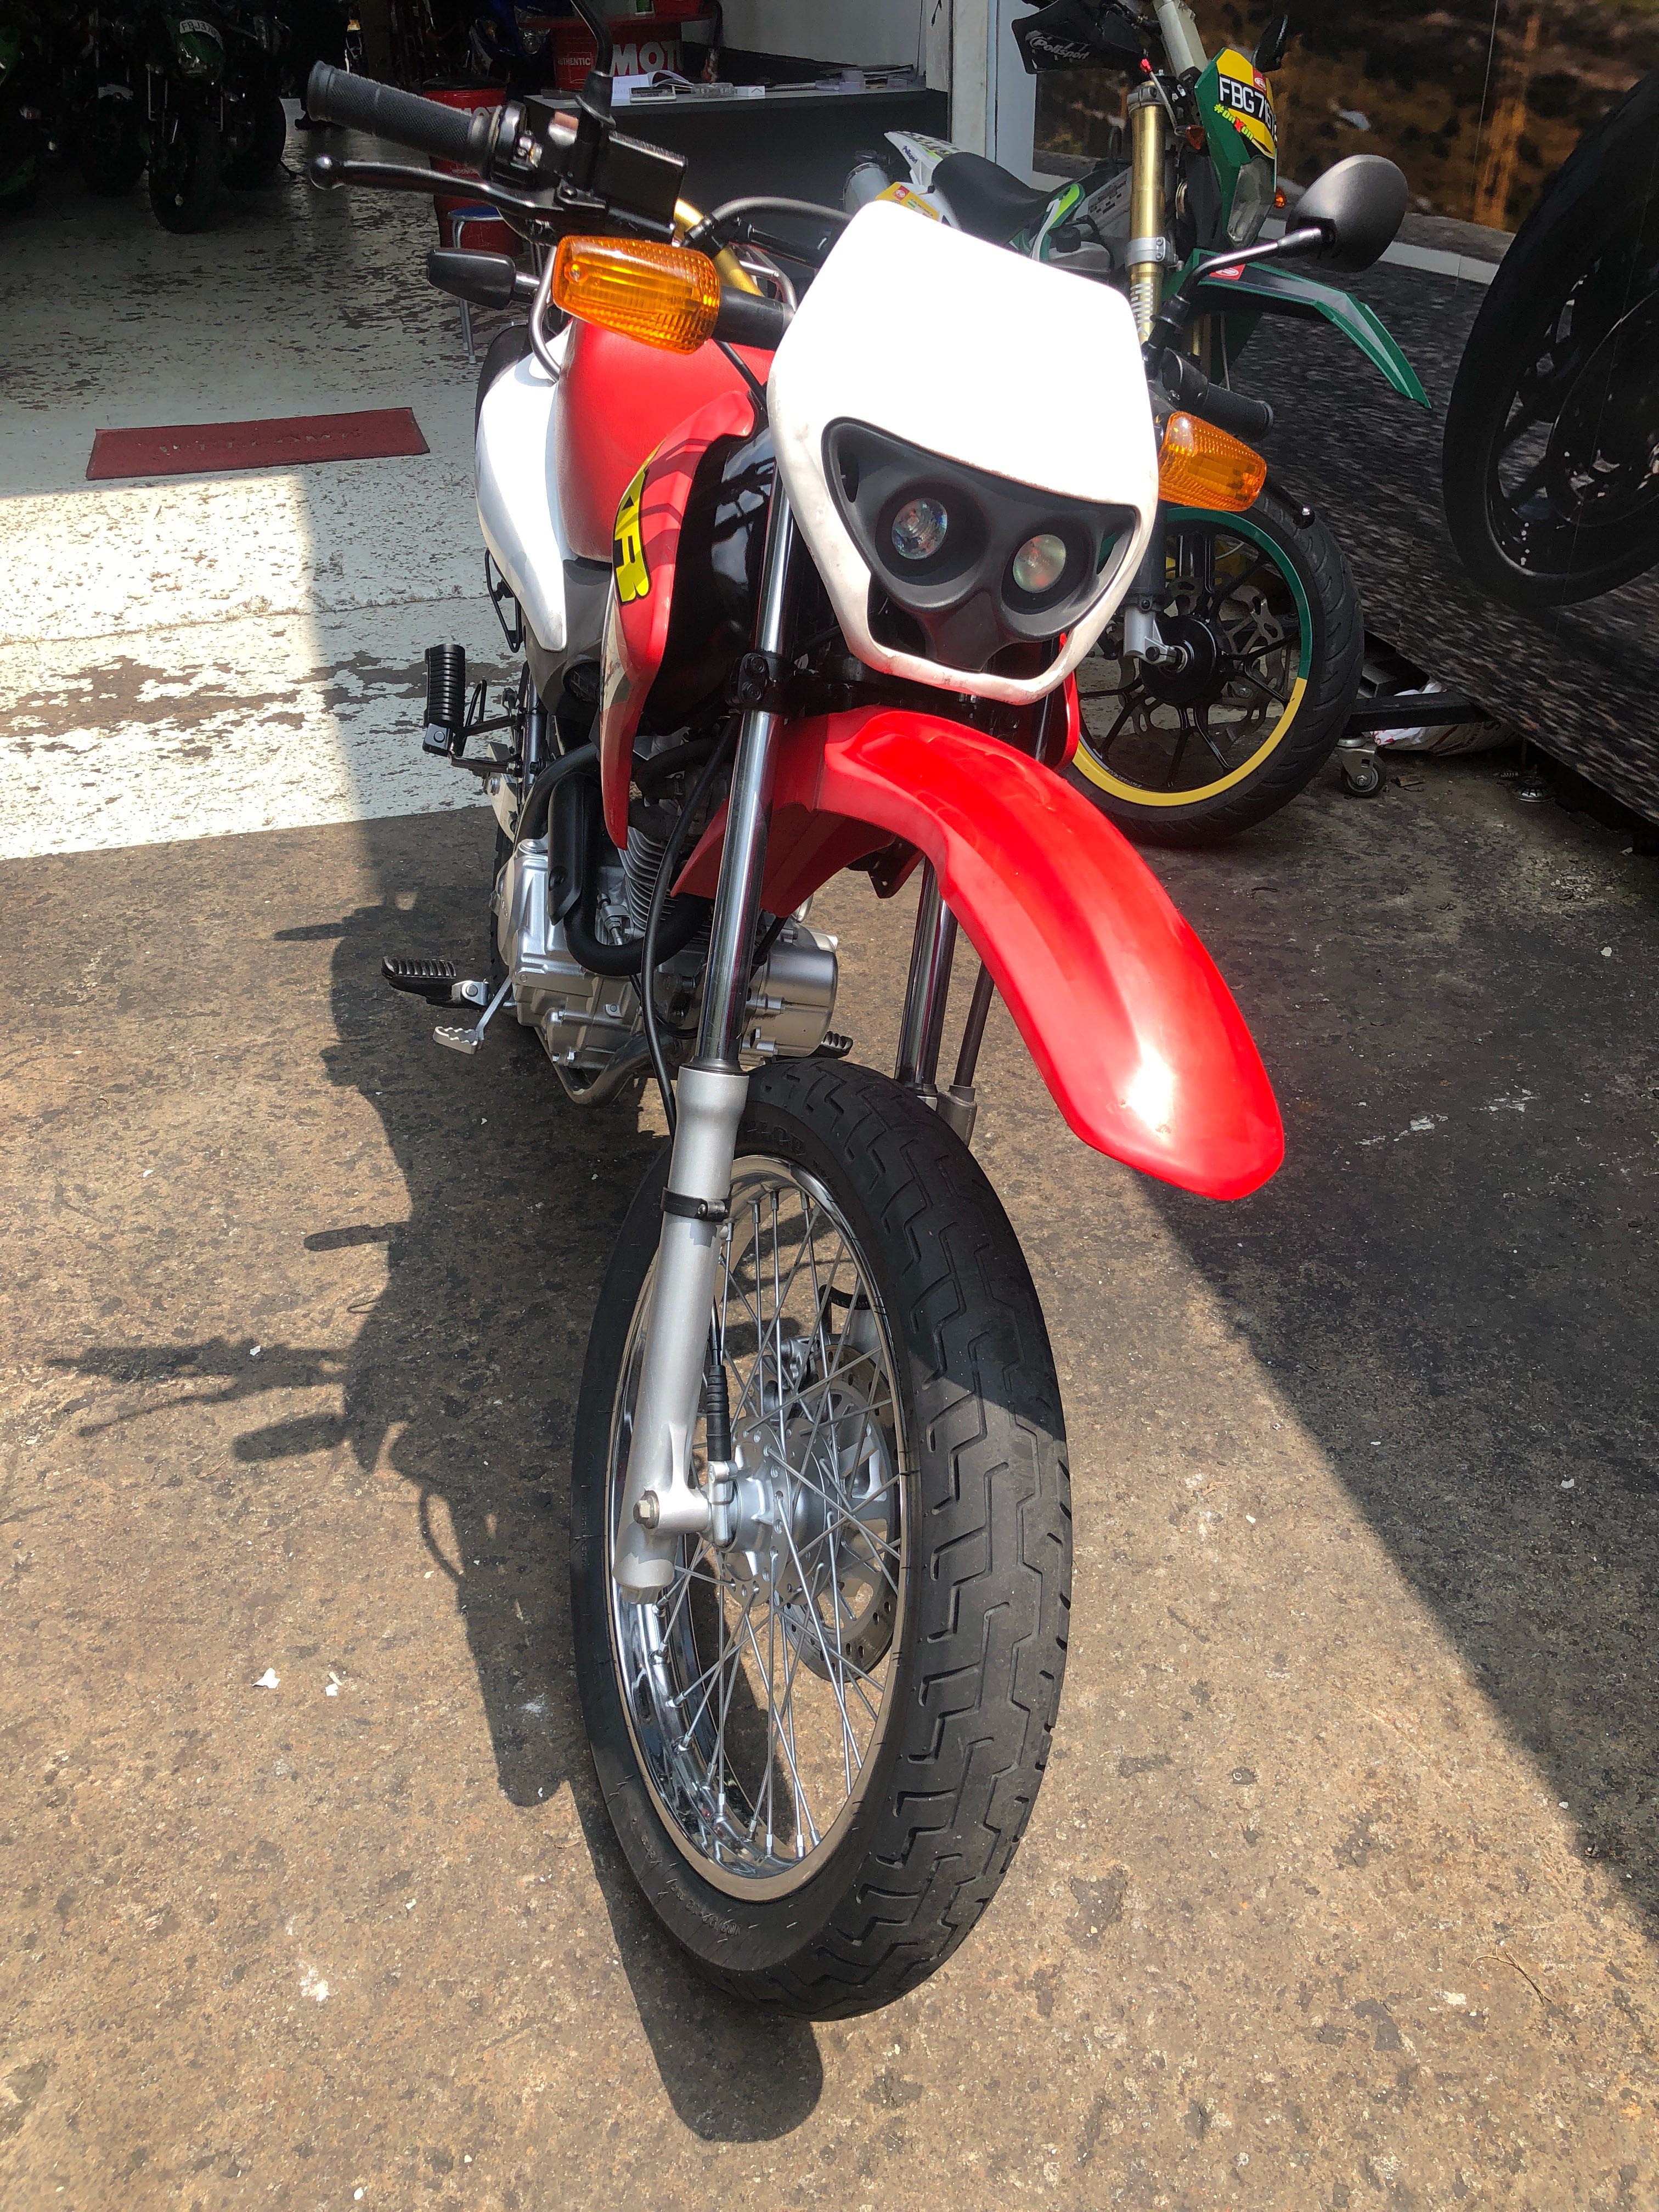 Used Honda Xr125 Motorcycles Motorcycles For Sale Class 2b On Carousell